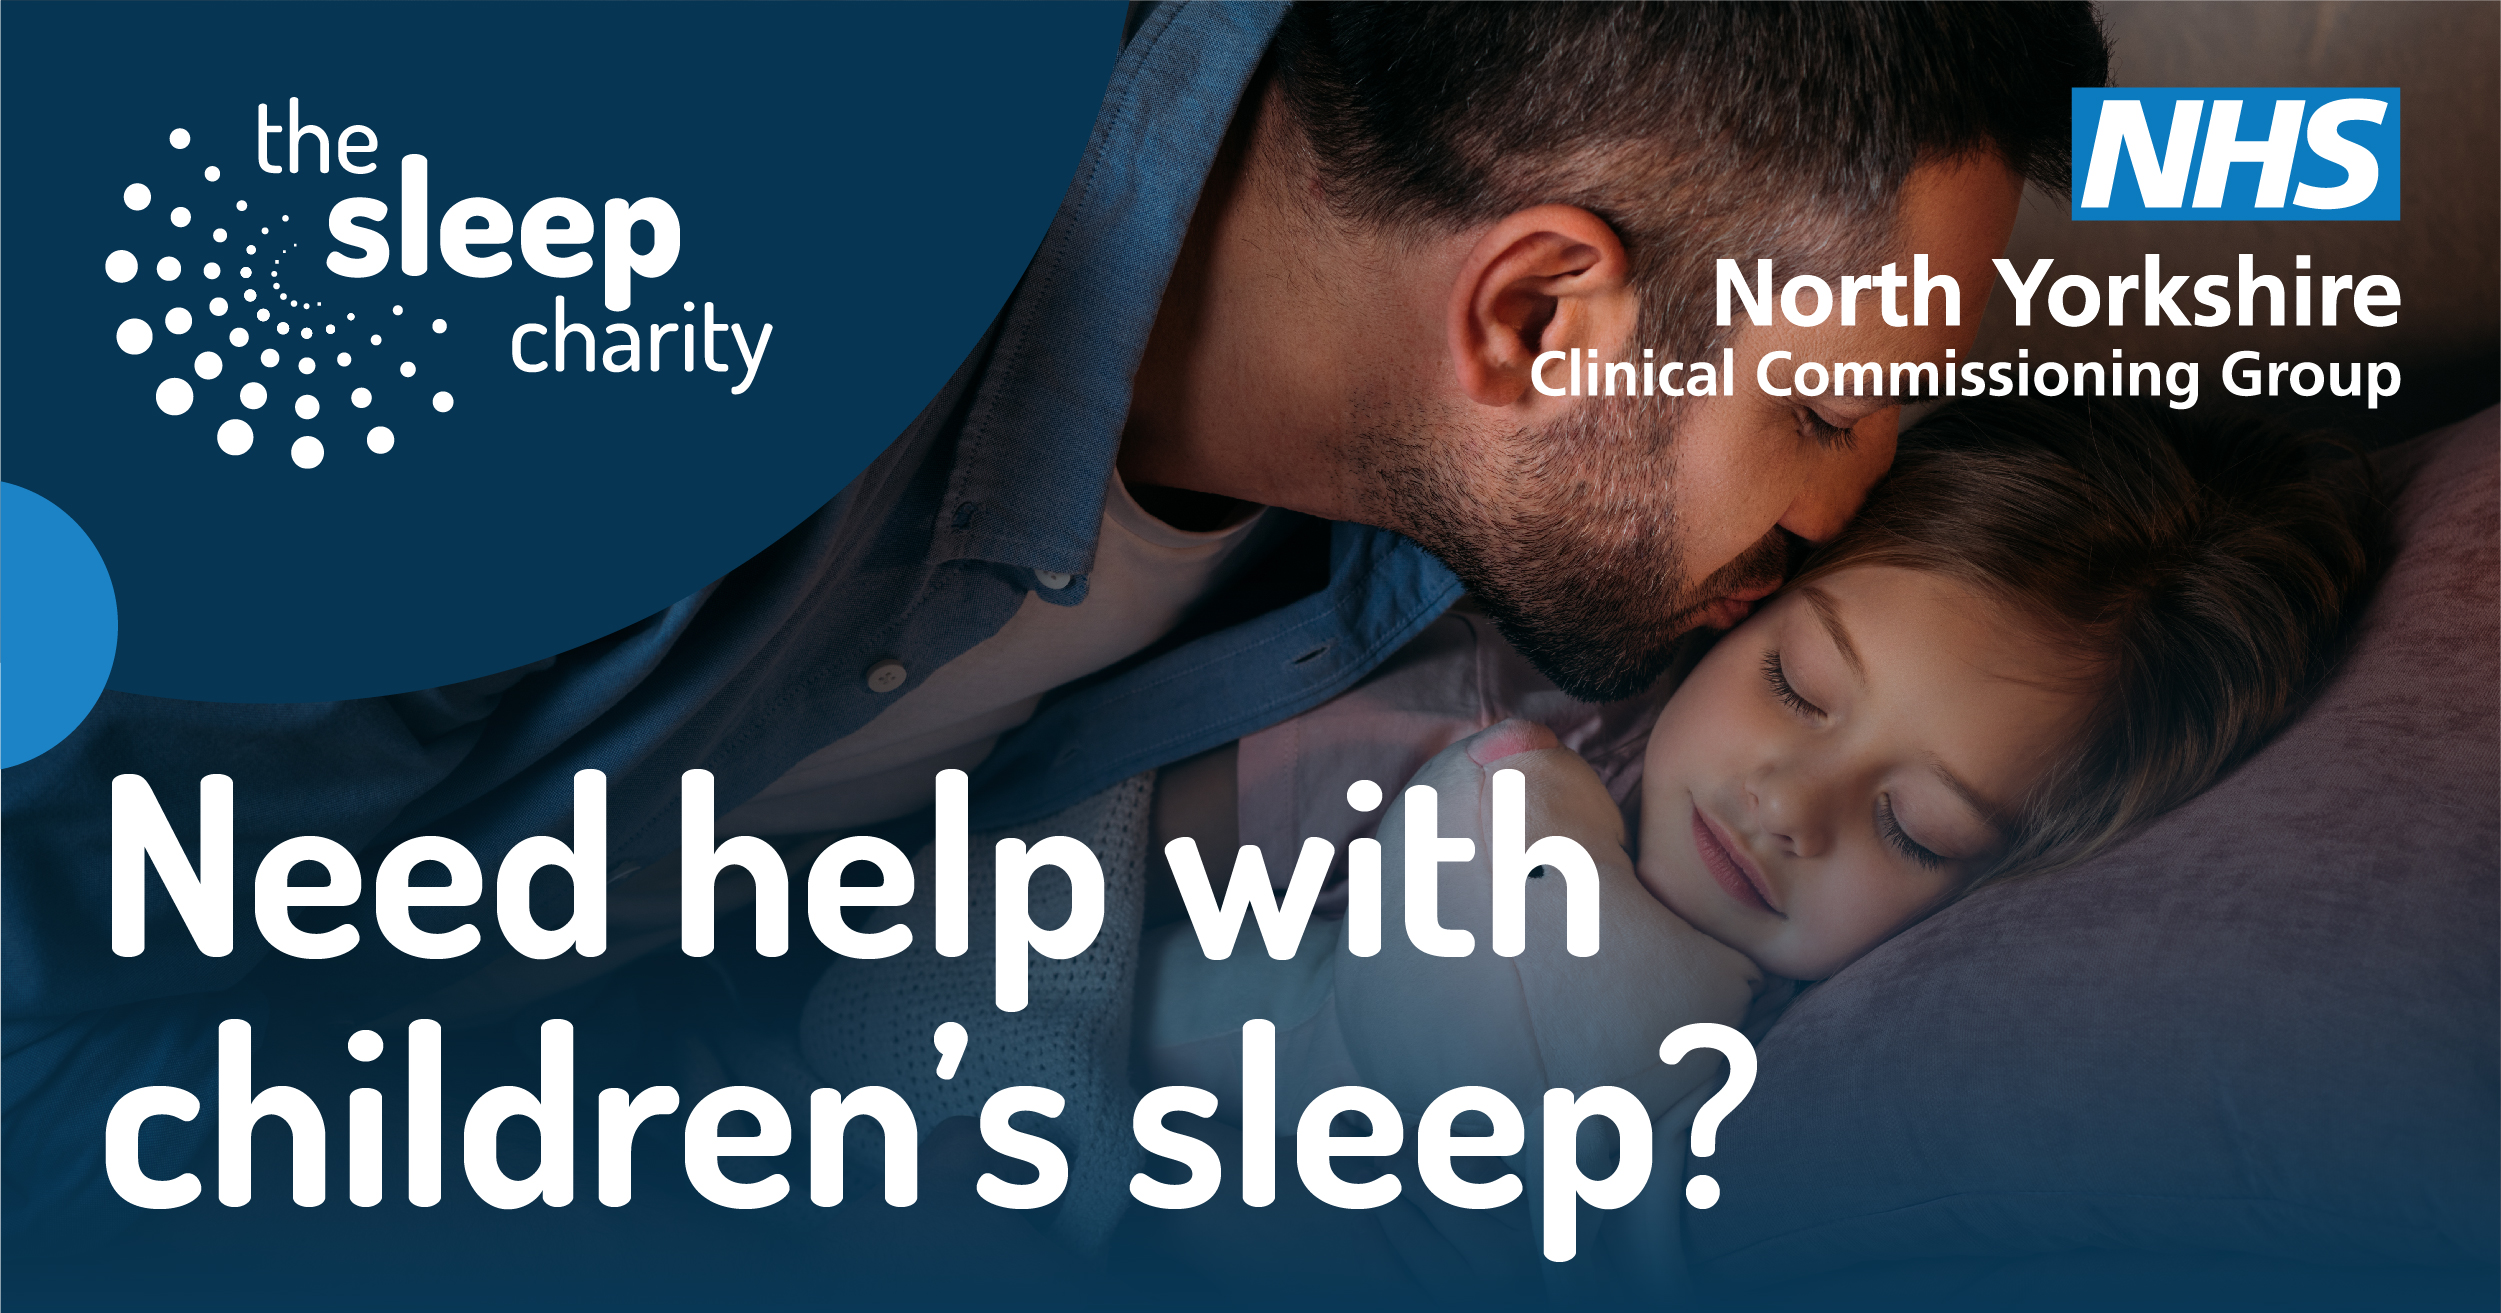 Services delivered by The Sleep Charity are now available across North Yorkshire.